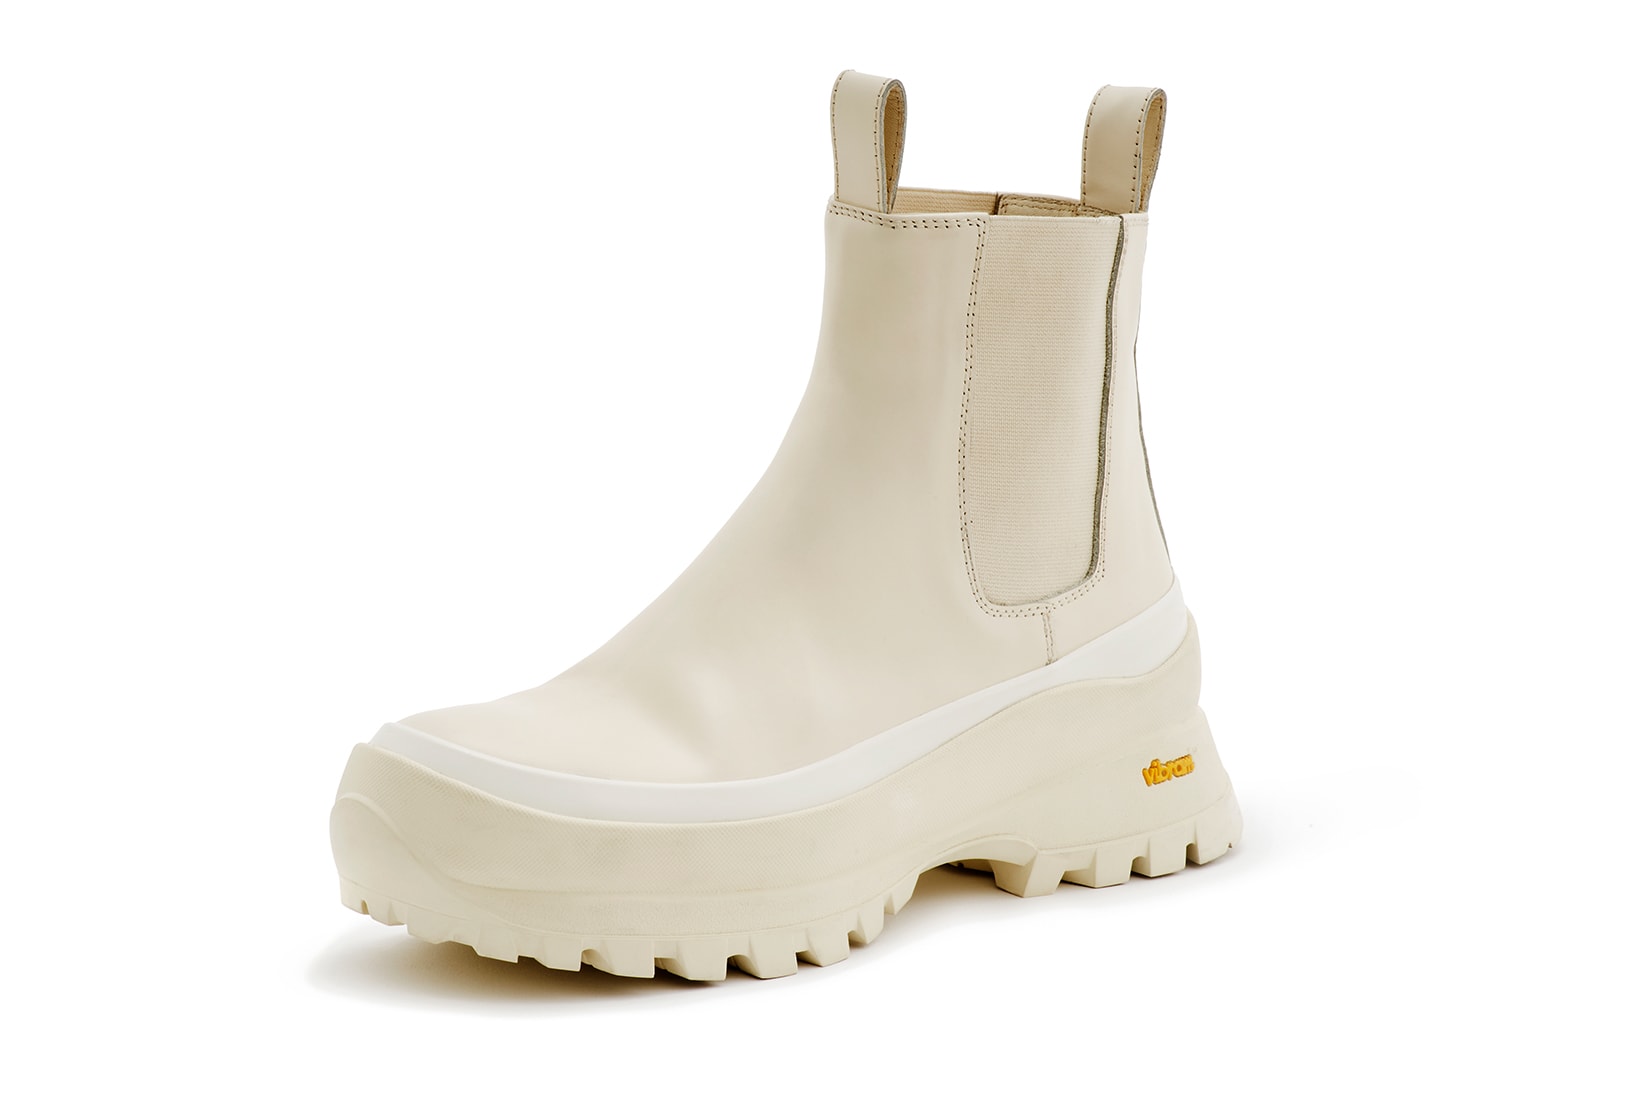 jil sander fall winter unisex accessories collection vibram ankle boots bucket hats designer bags 